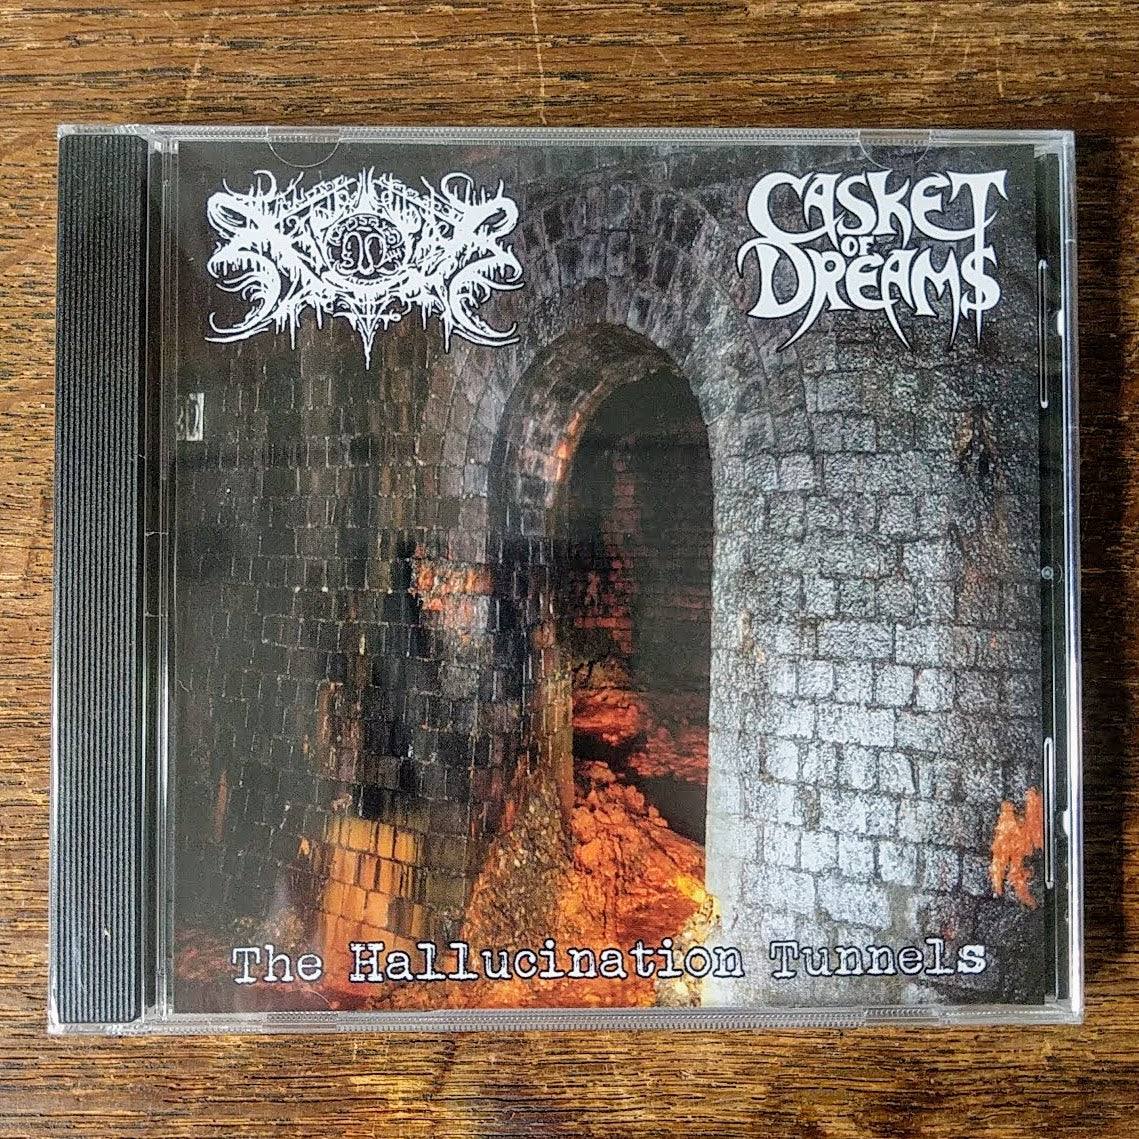 [SOLD OUT] XASTHUR / CASKET OF DREAMS "The Hallucination Tunnels" CD